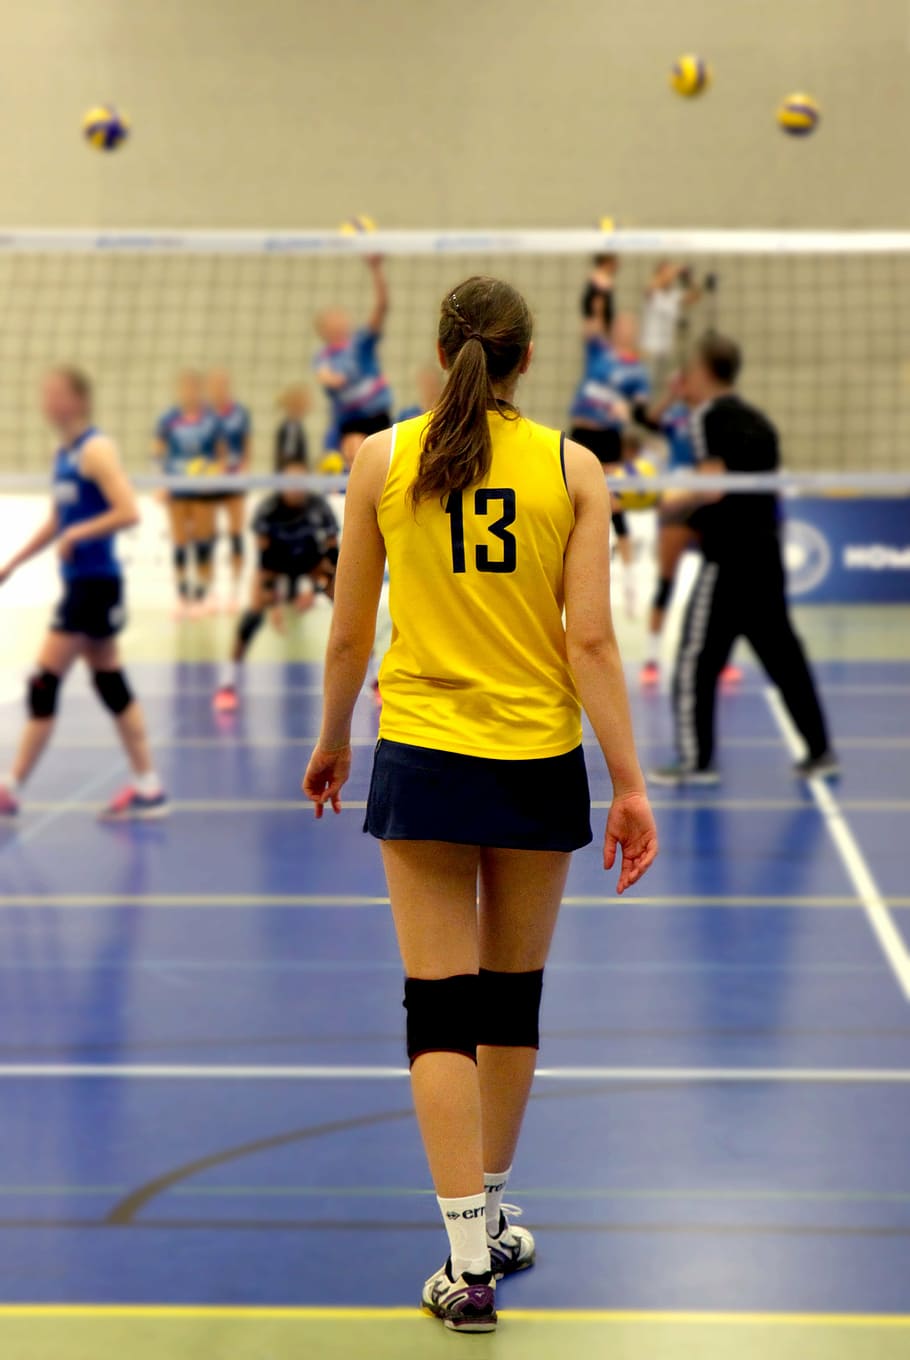 volleyball player, approaching, white, net, volleyball, sport, ball, volley, ball sports, team sport